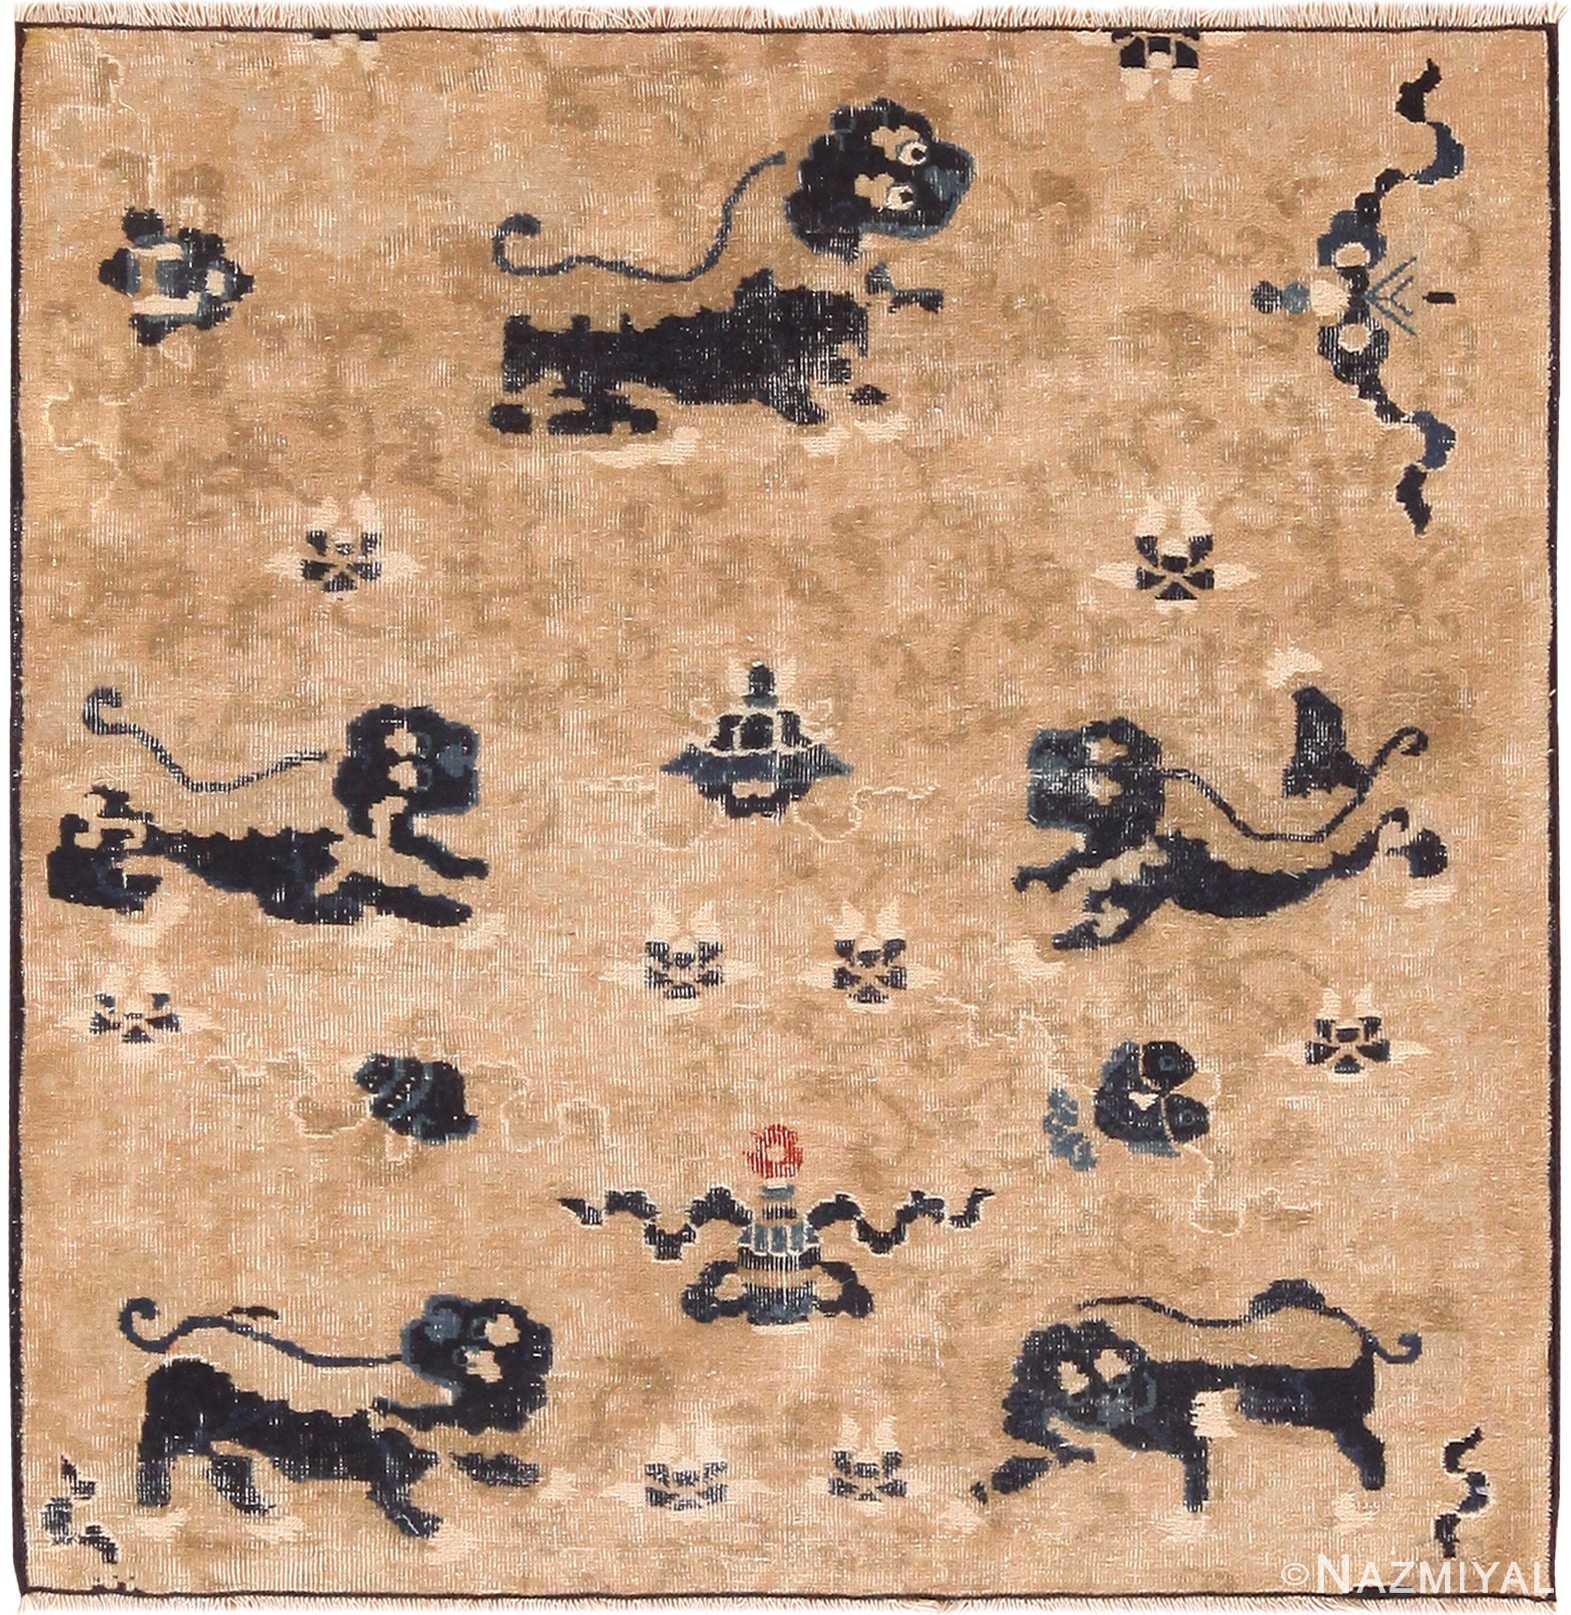 Square Antique Chinese Dragon Design Rug 43138 by Nazmiyal Antique Rugs